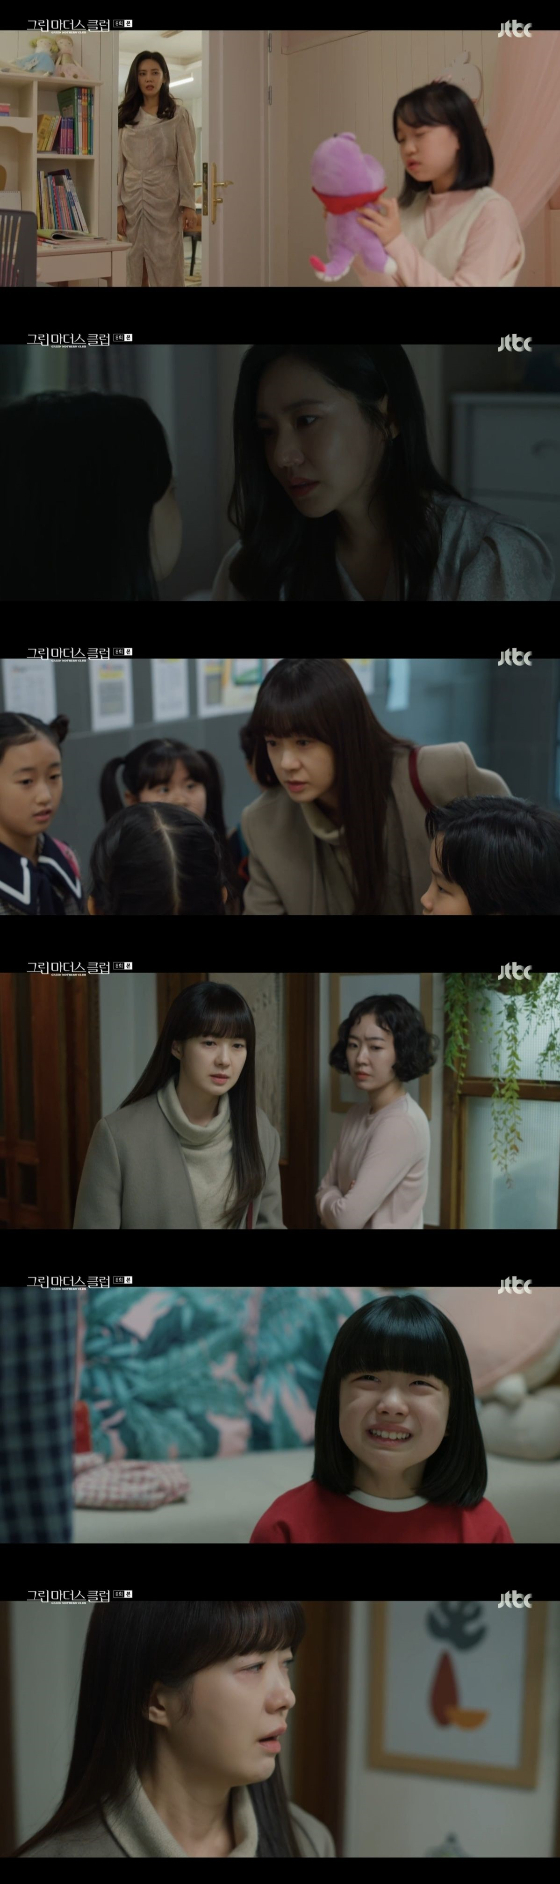 In JTBCs Wednesday-Thursday evening drama Green Sams Club, Lee Eun-pyo was surrounded by parents including Chang Chun-hee (Choo Ja-hyun) and Park Yun-ju (Resident Kyung).Lee Eun-pyo said, Why are you doing this? Where are all the children? Byun Chun-hee said, I did not come because I thought I should talk about what children should not hear today.One of the parents said, The Dong-seok is embarrassed to put it in his mouth.Another parent said, Dong Seok took Yubin and Suin to the empty classroom of the institute and showed them where they should not show. Lee Eun-pyo said, What is that?I can not do that, the parents said, thats all. You should not go anywhere. Blackmail – Cinémix Par Chloé.I am afraid to send school now. I do not need to say anything, and what I want is that your family wants to be an In-N-Out Burger in this community. I do not want to see anything about apology.Lee Eun-pyo said, Im really the first to hear it. I can not believe it. Lee Eun-pyo looked at Park Yunju and said, Is it true?Is it Suin? Park Yun-ju stared at Lee Eun-pyo without saying anything. Get in the room, Mom. Yeah. I understand parents who dont want to believe.If your child has made such a big mistake, it is the order for your parents to kneel and apologize. Lee Eun-pyo said, I am really sorry if it is true. But once I hear the childs story, I will listen to it.Oh, thats crazy. I didnt even have to cheat on my friend to the world. Why are you pretending its not her fault?If I sue legally, I can have to live with my own tag for the rest of my life. Lee Eun-pyo said, I did not smoke like a wind. Why do you keep driving people? Byun Chun-hee said, Please do not just in-N-Out Burger.It is the last consideration I can give. At that time, Lee Eun-pyo went to the academy of son Dong-seok and heard the childrens conversation. The children laughed, saying, Yubin and Lee Soo-in saw the Dong-seok Panti and it was red Panti.When Lee Eun-pyo grabbed the child and asked, Where did you hear that?, The child replied, Yubin and Lee Soo-in did it. Lee Eun-pyo went to Park Yuns house.When Park Yun tried to kick Lee Eun-pyo out, Lee Eun-pyo went into the house.Lee Eun-pyo said, I came to ask Su-in only one question. Su-in, Im so sorry for your aunt. Do you remember what color the underwear was?Red, Lee said, and when Lee Eun-pyo said real? Su-in said nothing, Park Yun-ju pushed back, Cant you see me making a game of kids stop?Lee Eun-pyo said, Our seat has a sense of color, so Panti is not blue or anything. Its a lie. When Park Yunju bursts, Lee Soo-in said, Do not do it to my aunt.Im sorry, I lied, he said. If Yubin does not lie together, I was rumored to work at my mother Mart. Lee Eun-pyo said, Su-in (Park Yun-jus daughter) said that Yubin (Yang Chun-hees daughter) told Su-in that she had blackmail - Cinémix Par Chloé.If Dong Seok (Lee Eun-pyo son) does not lie that he has sexual harassment, he will be rumored to work at Suins mother Mart. Then Park Yunju said, How did you raise a child, you did blackmail - Cinémix Par Chloé. Did I steal? What did you do?Im poor and youve hurt me. My daughter is better at studying. But why ignore her? Lee Eun-pyo said, Yubin should apologize to the attendant. And the people here. Apologize to me.How can you guarantee that you two are playing together? You started with a red lie in the first place. Your husband (Jung Jae-woong, Choi Jae-rim) also said.Henri Mam (Seo Jin-ha, Kim Kyu-ri) died. There was nothing that was not a lie. You actually wanted Henri to die, I saw it all, you slapped Henri, said Chang Chun-hee. And then Lee Eun-pyo told Seo Jin-ha what he said.Lee Eun-pyo poured the glass in front of him and shouted, What is this? He warned, I told you not to cross the line.Yes, this is your bottom, said Chang Chun-hee, laughing, and pretending to be a long bag, its nothing. Lee Eun-pyo said, You touched something you should not touch.I will step on my own. I will kill you. 